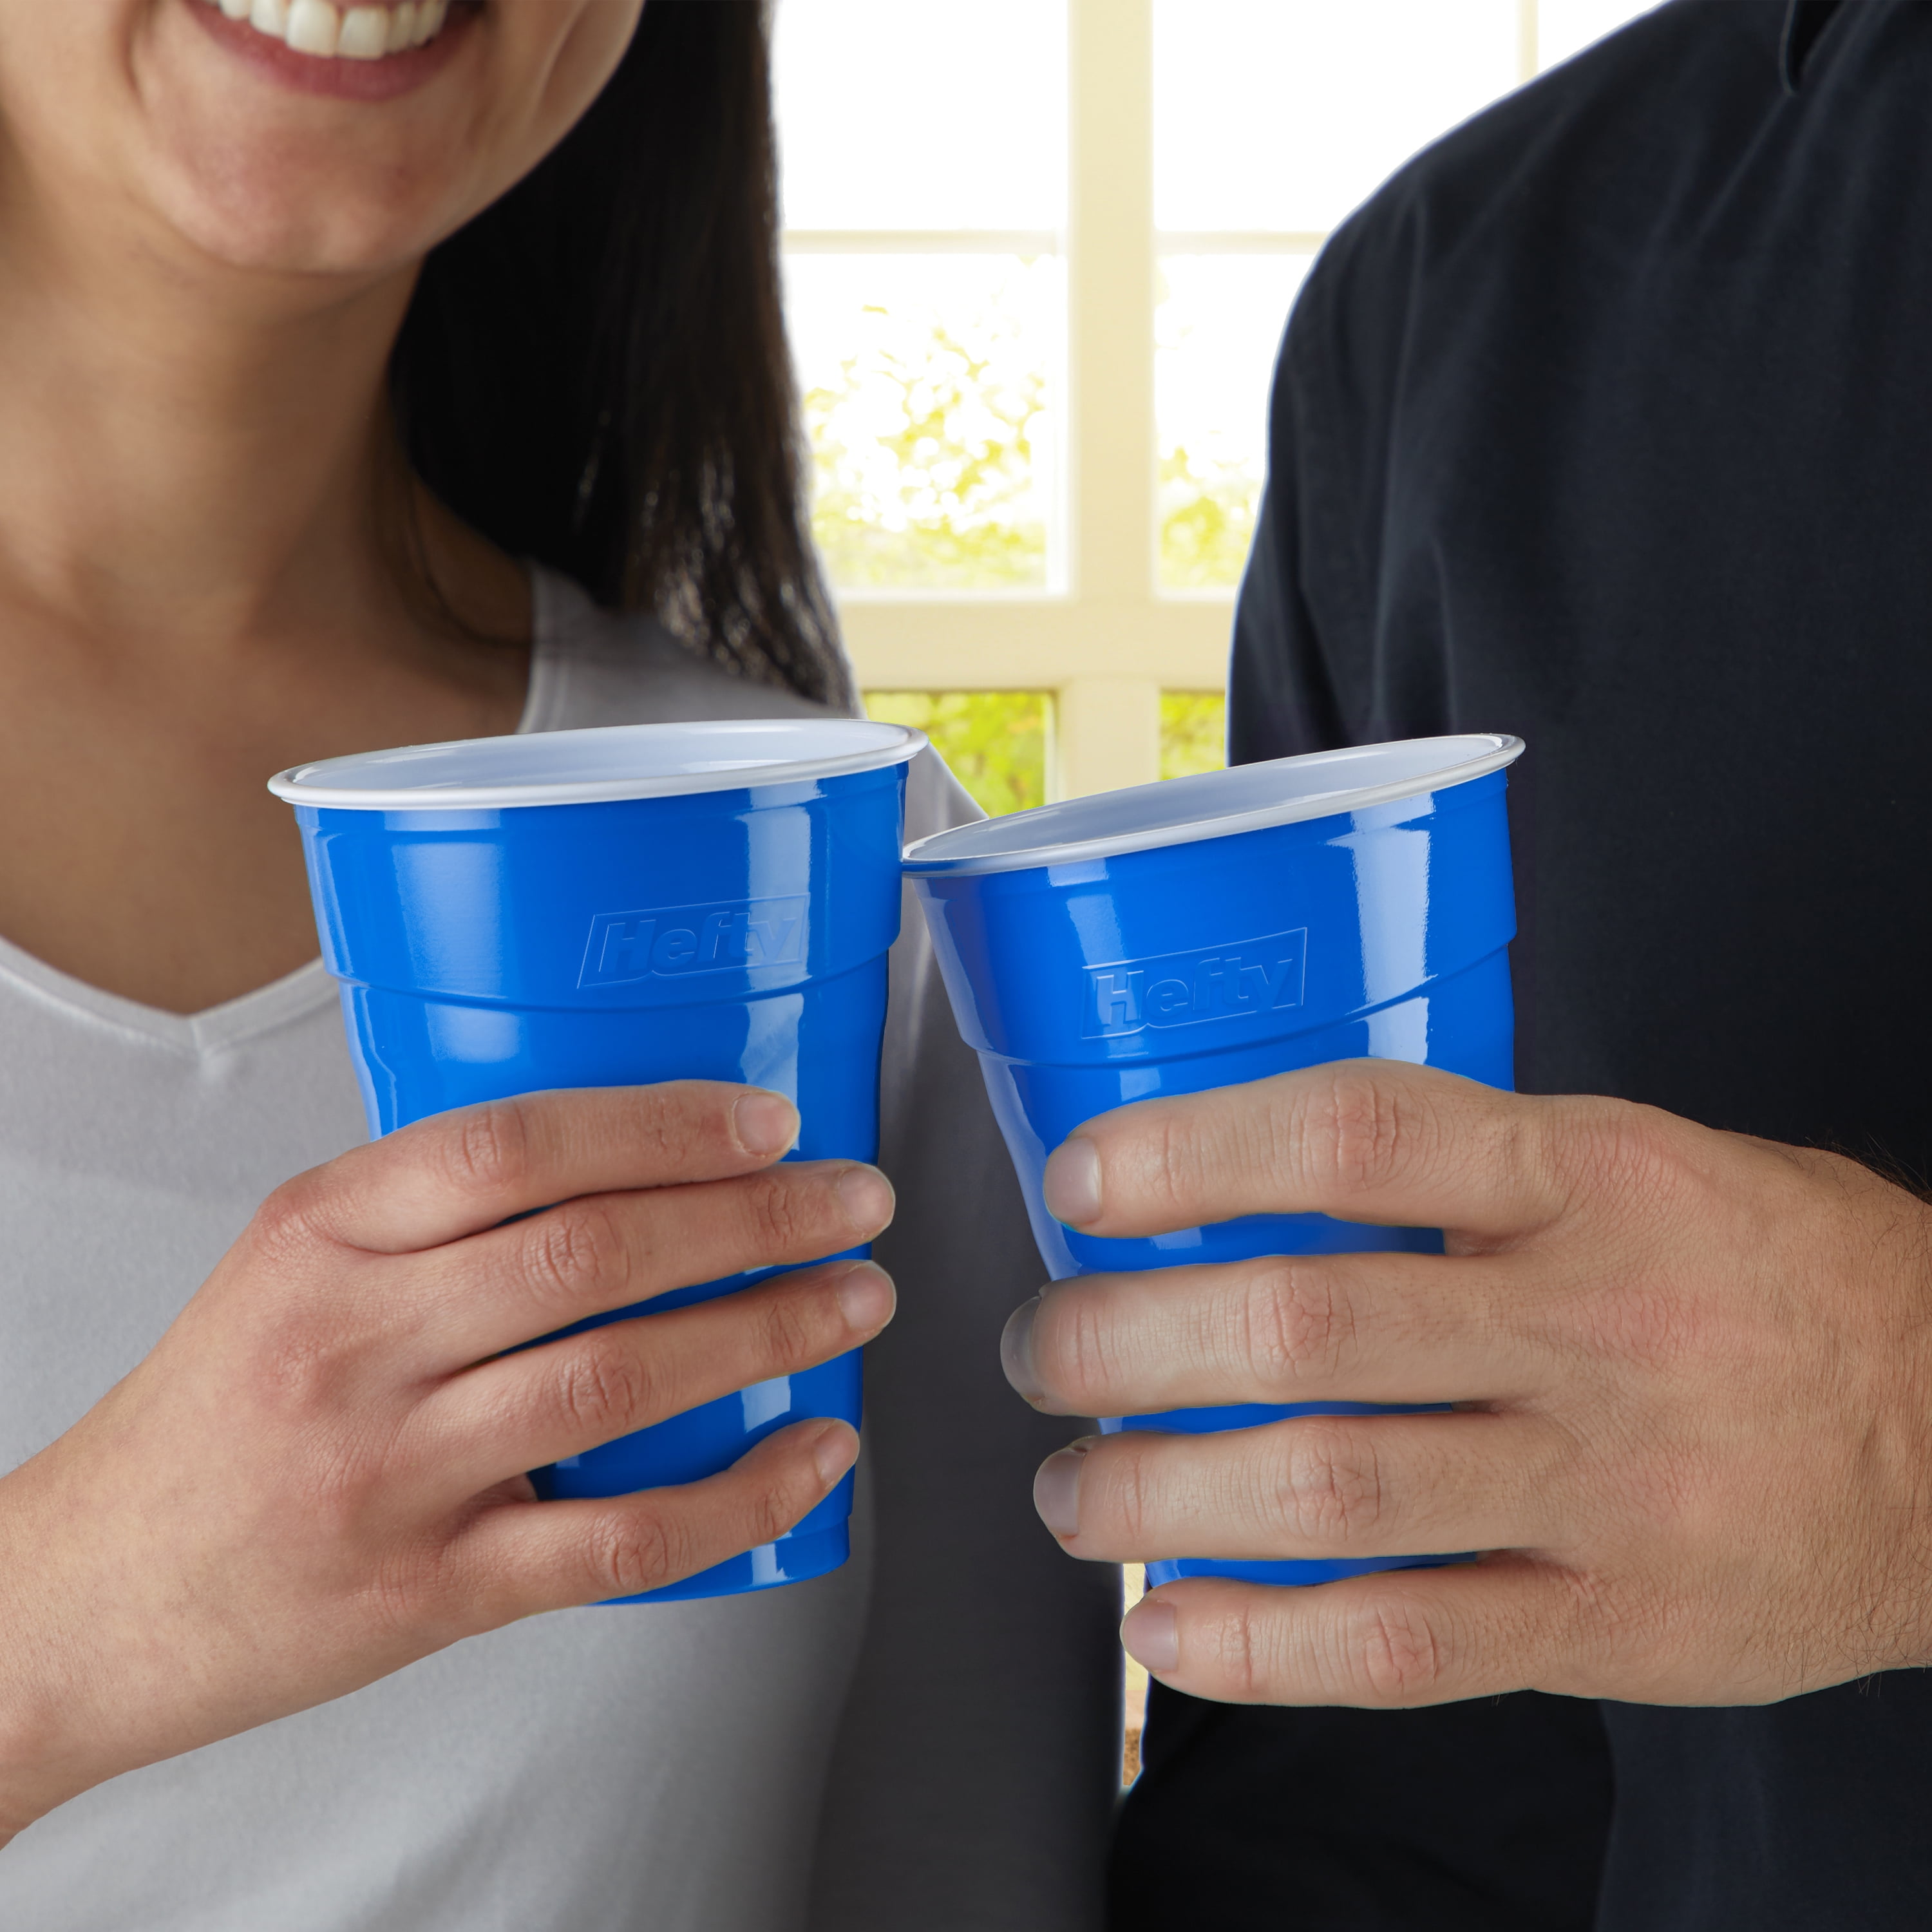 Hefty® Party Cups - BBQ 